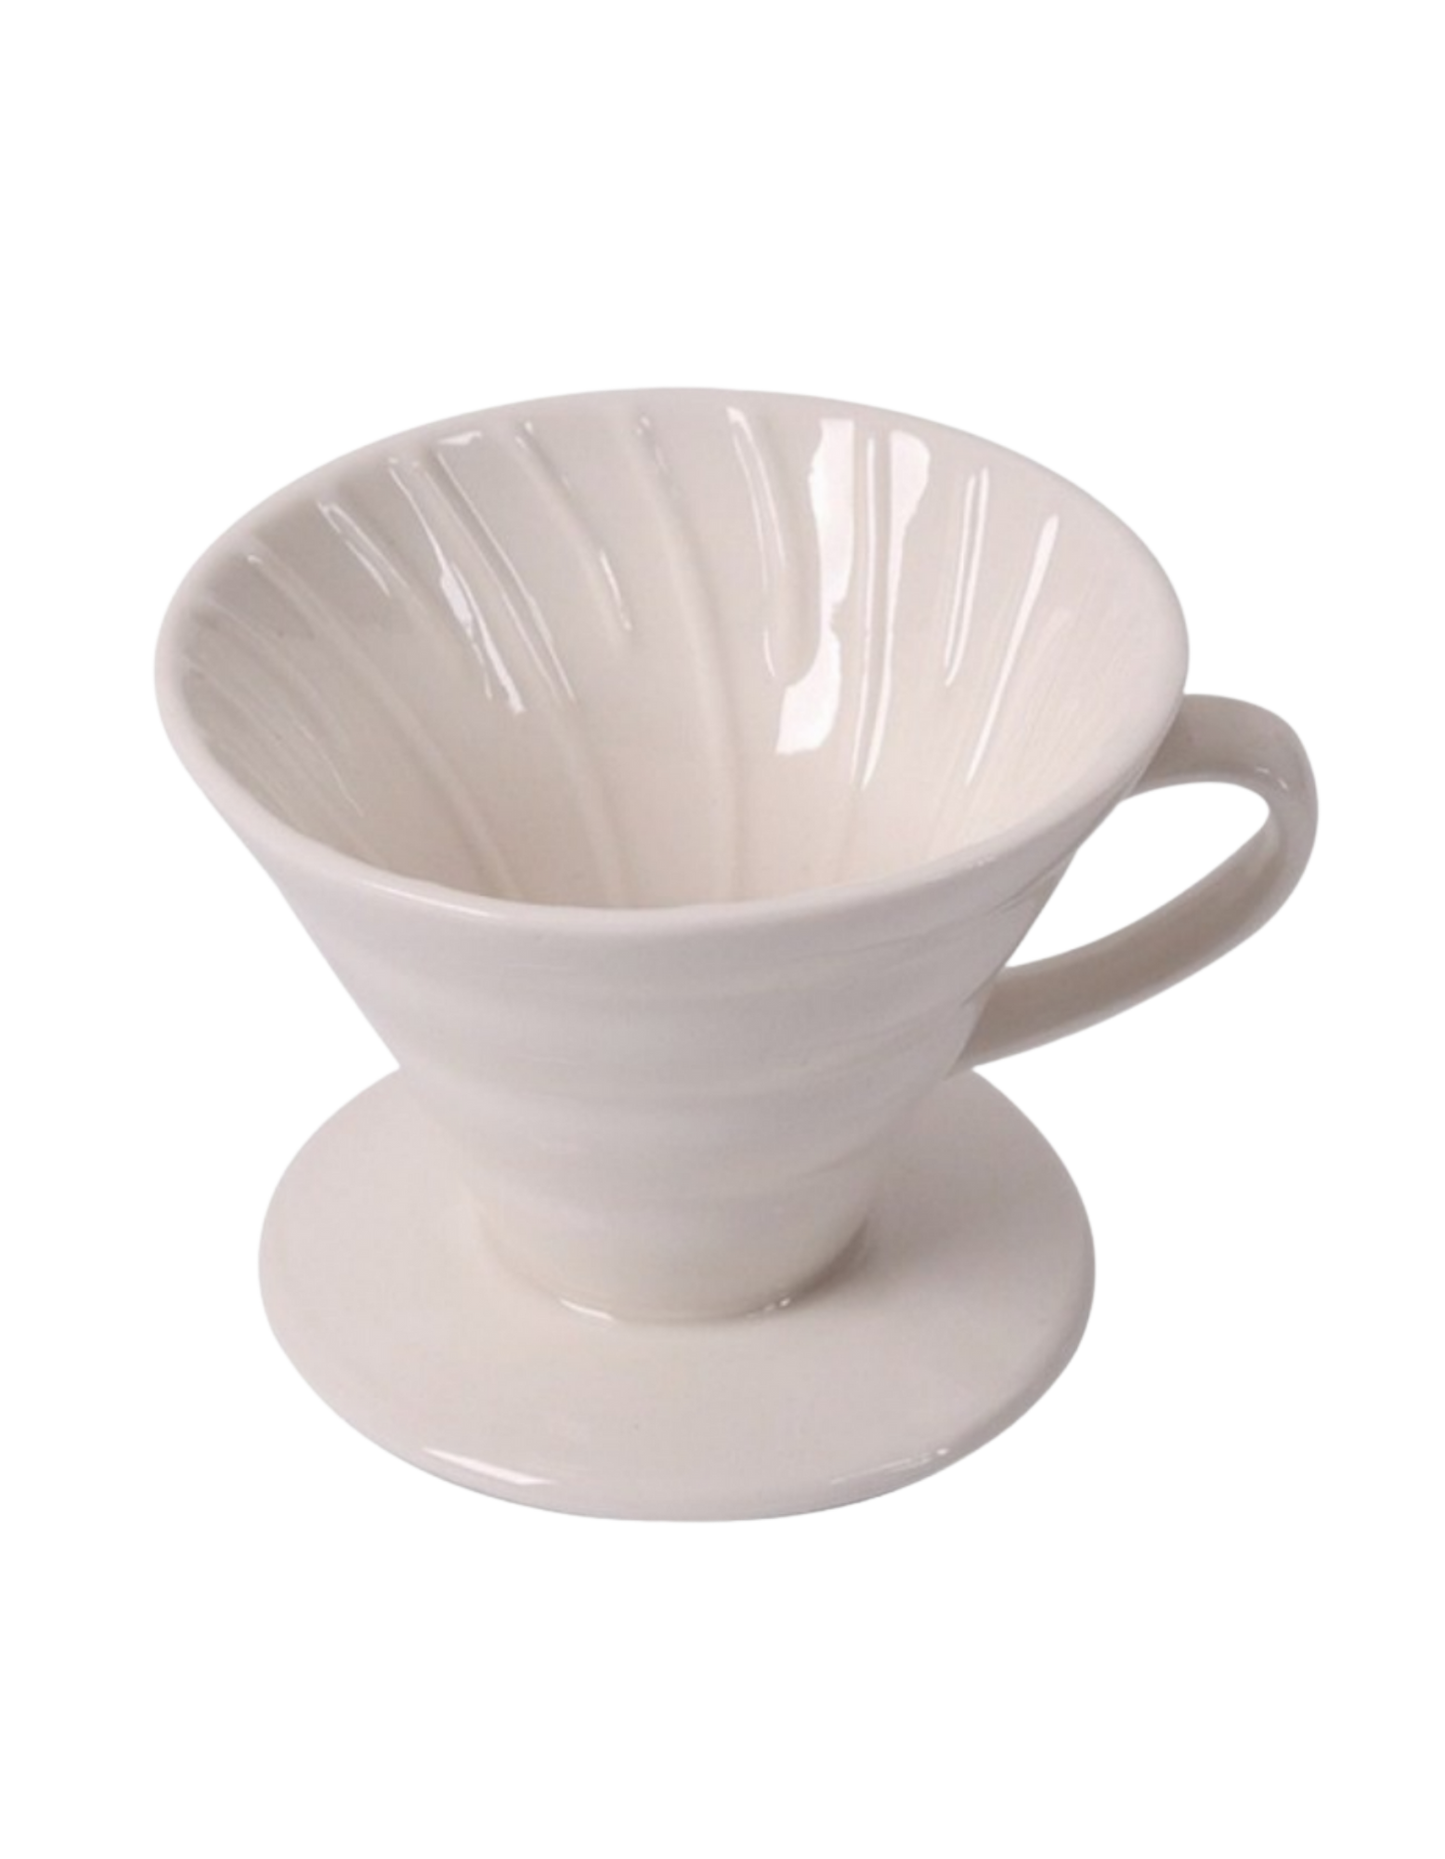 Pour Over Coffee Brewer